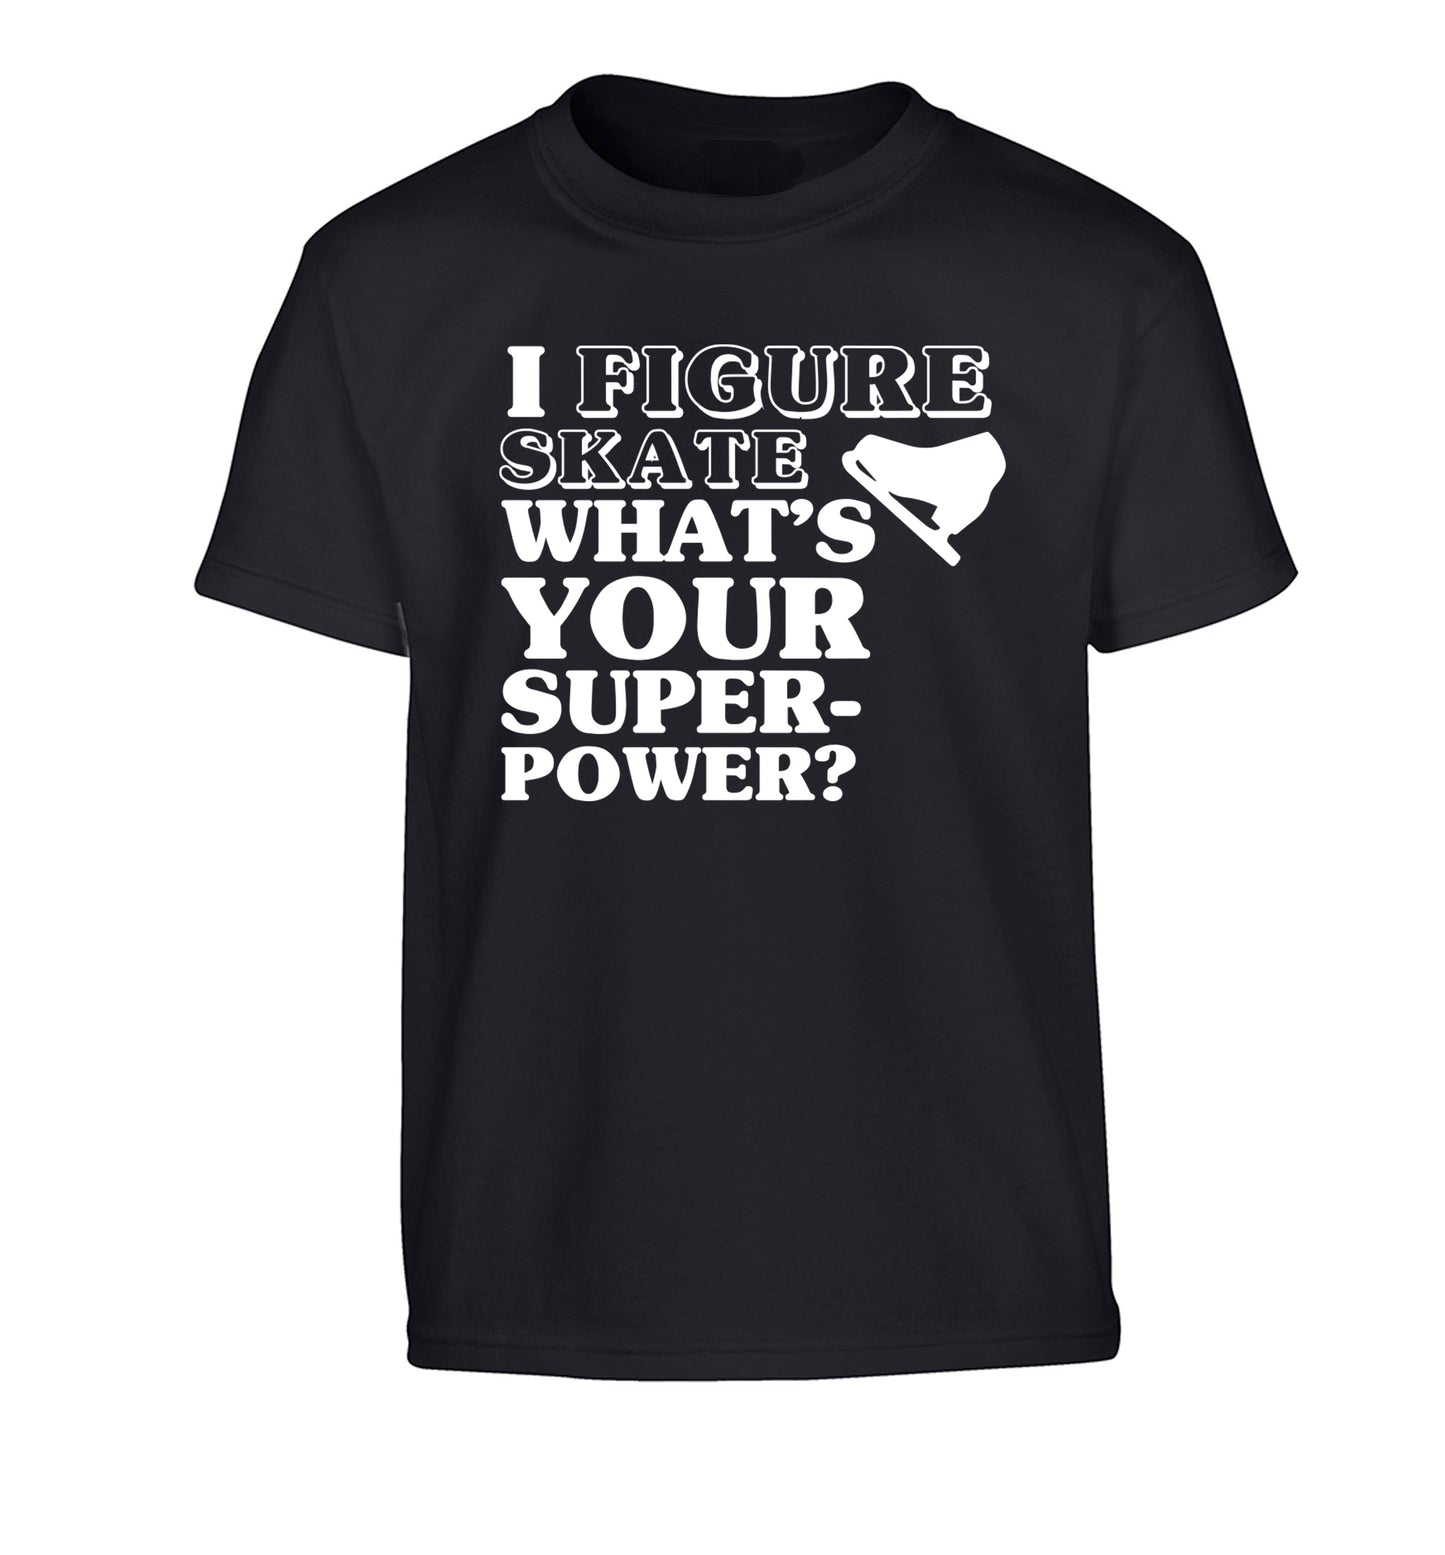 I figure skate what's your superpower? Children's black Tshirt 12-14 Years